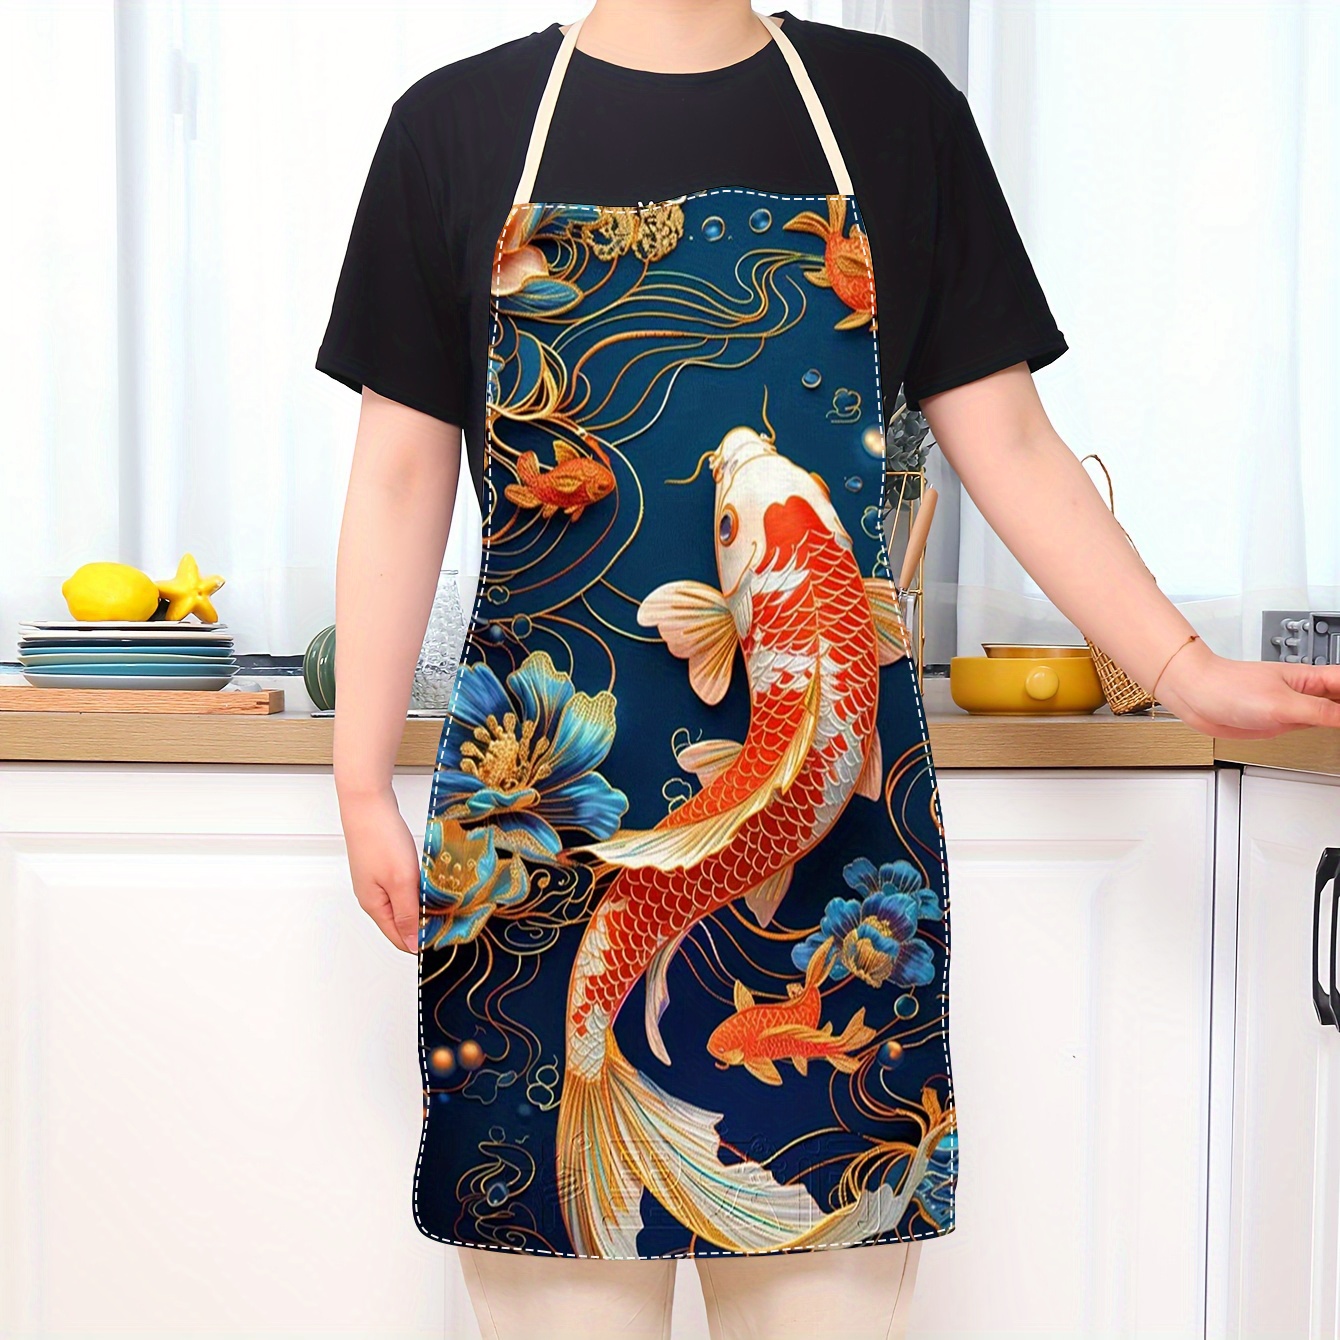 

1pc Soft Linen Kitchen Apron - Oil & Water Resistant, Cute Printed Design For Chefs, Fun & Practical Cooking Apron